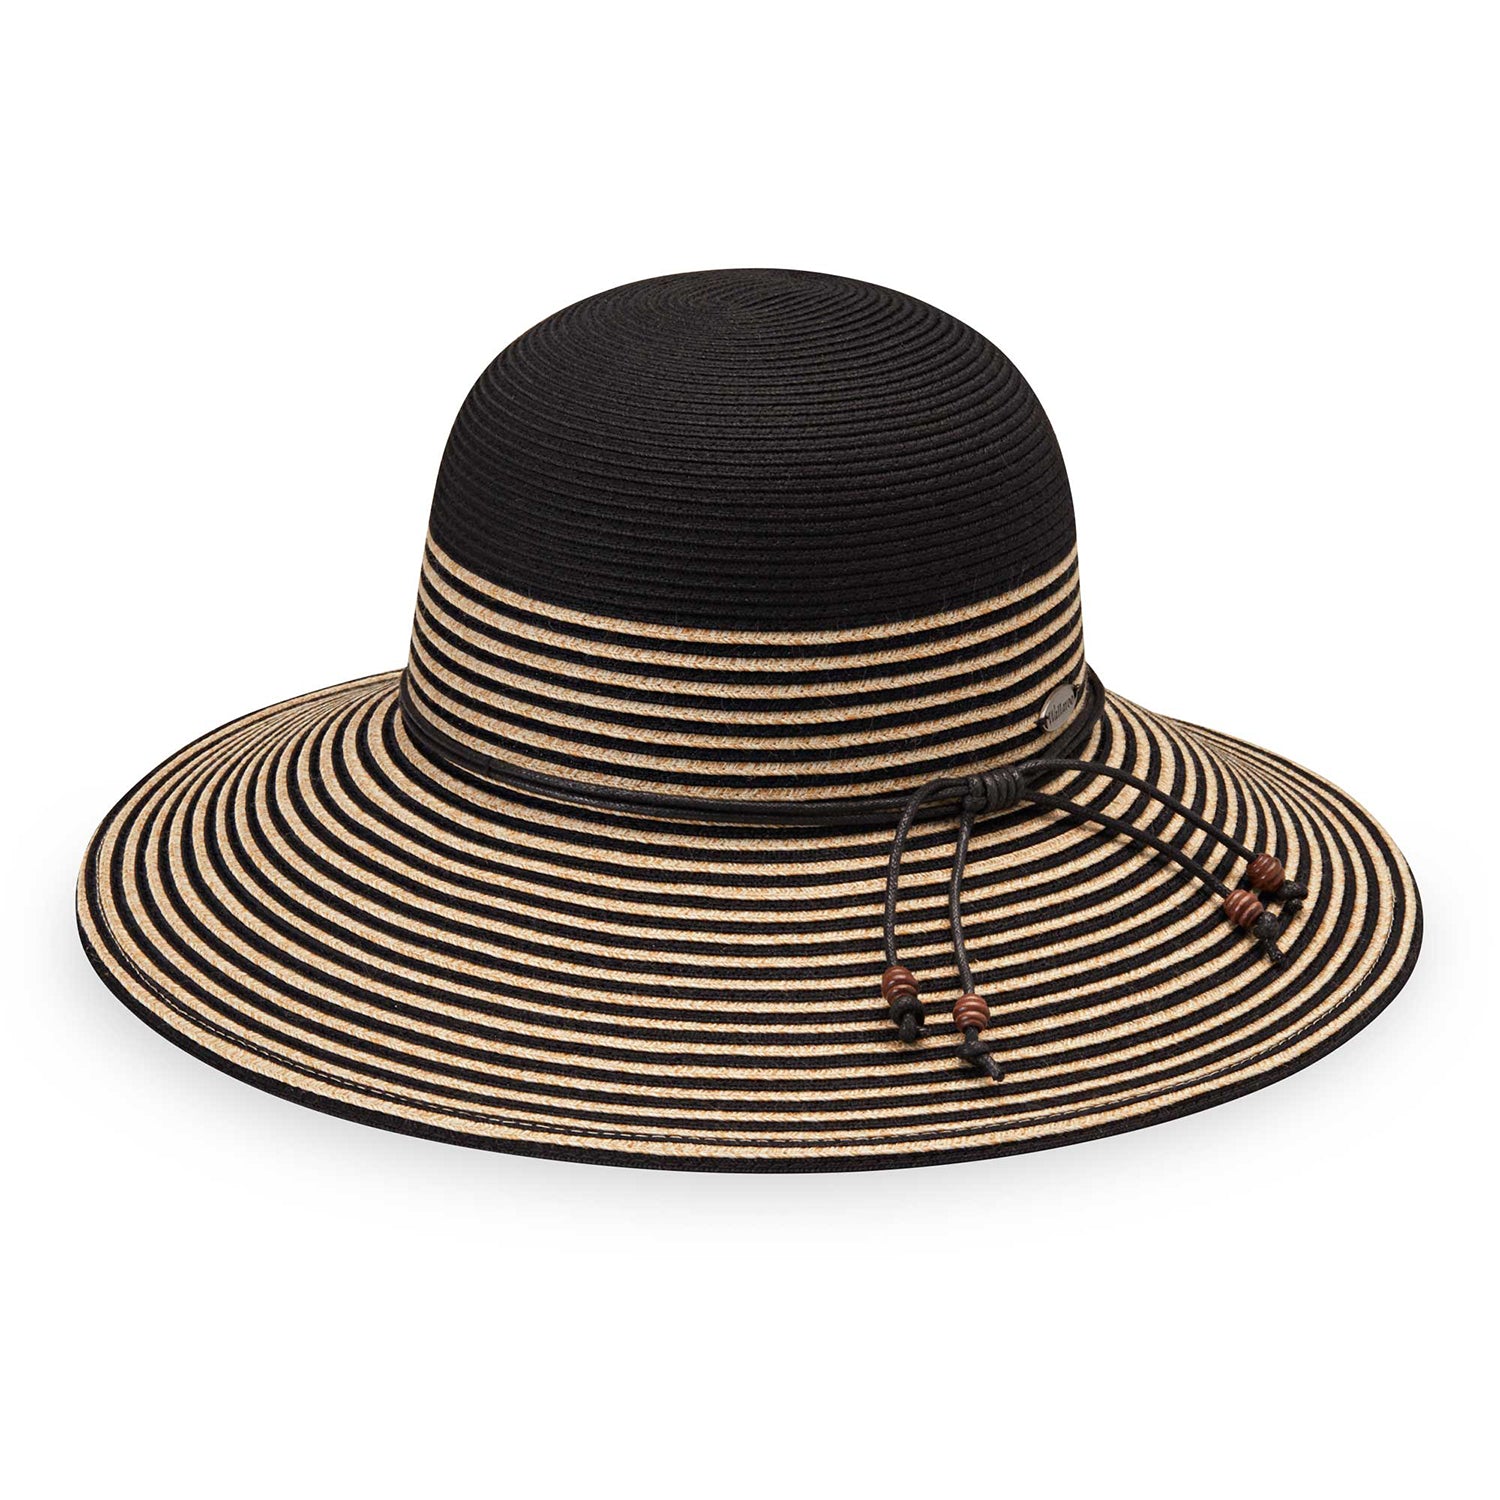 Featuring Women's petite marseille sun hat by Wallaroo, featuring a UPF 50+ rating and wide brim